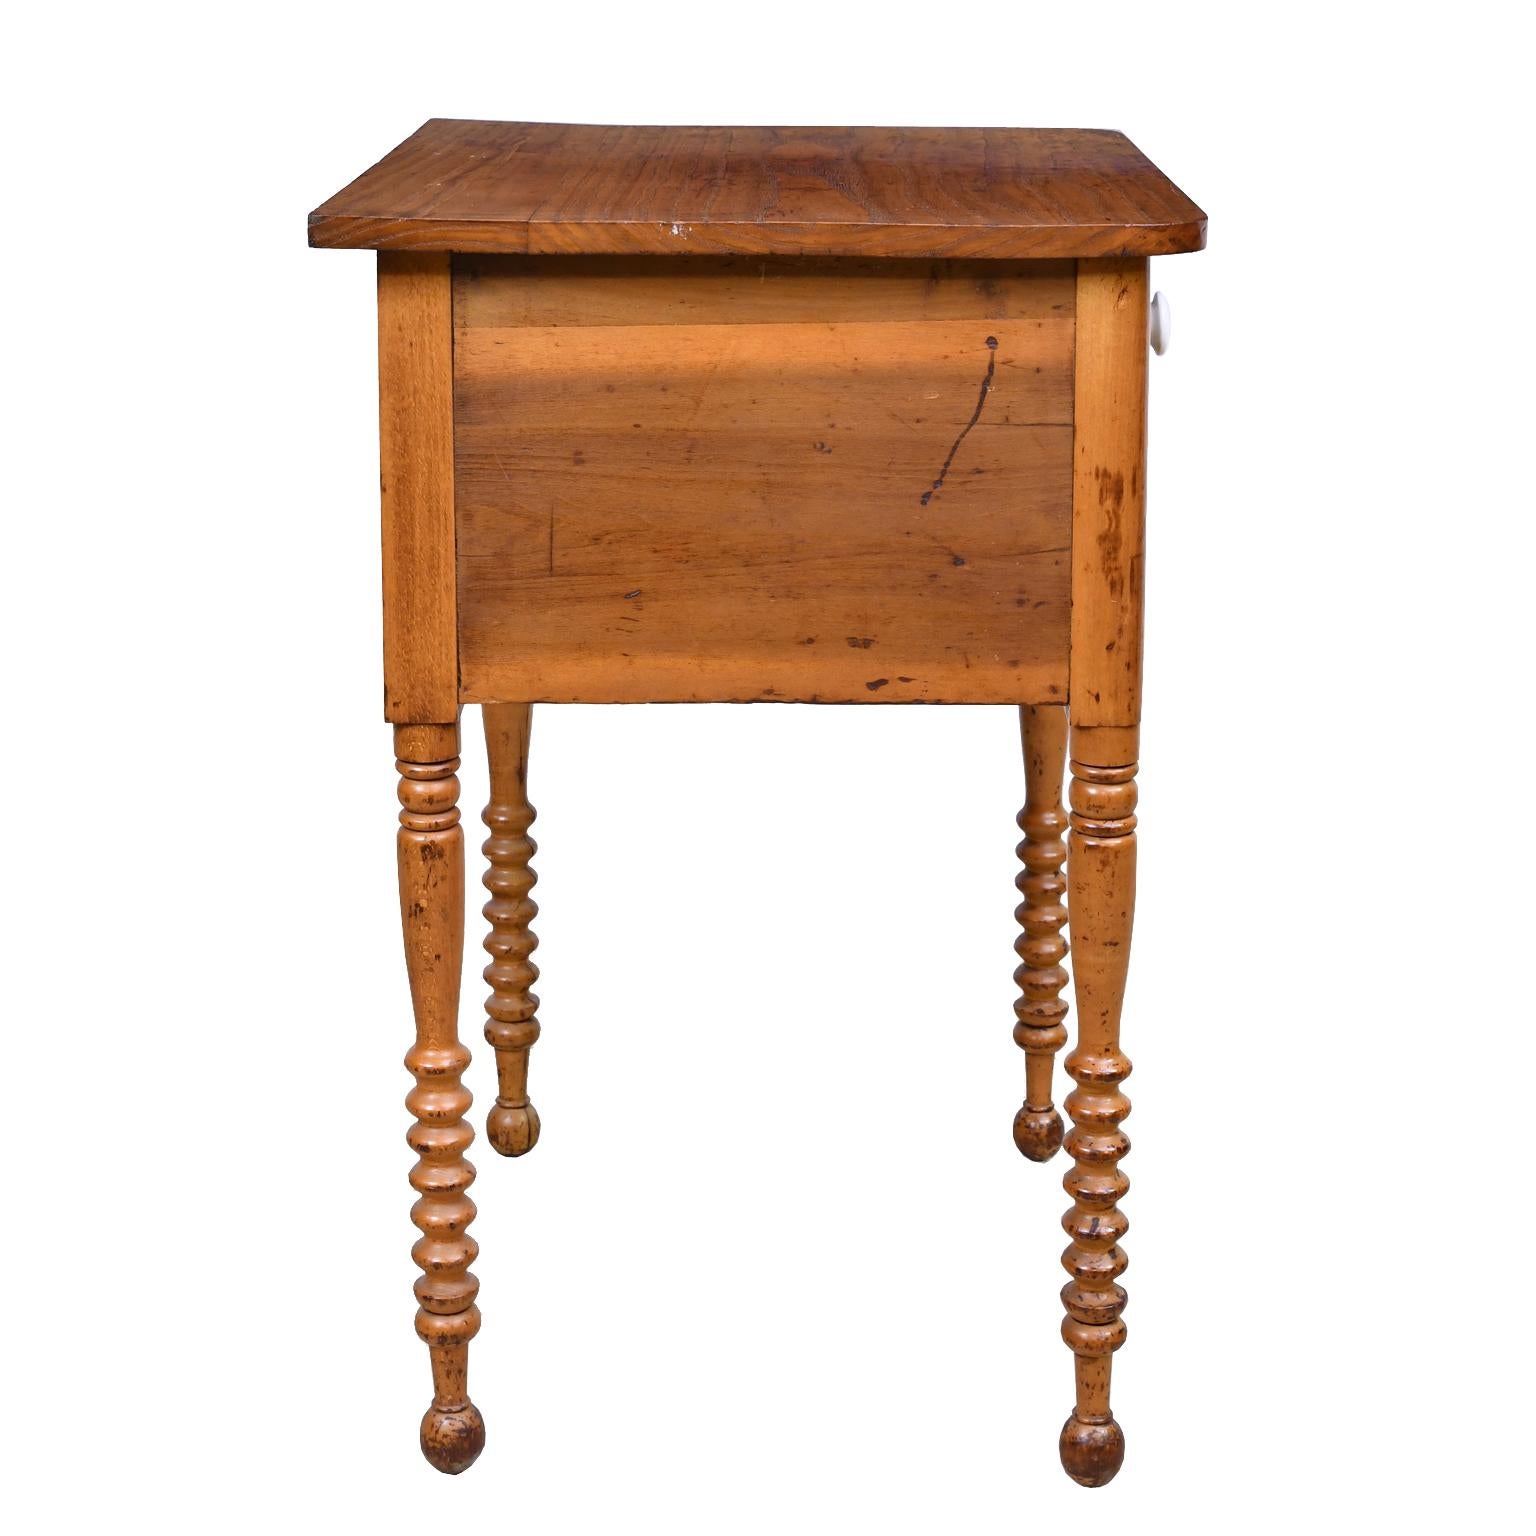 Federal Country Table or Nightstand in Fruitwood with Drawers, Pennsylvania 2